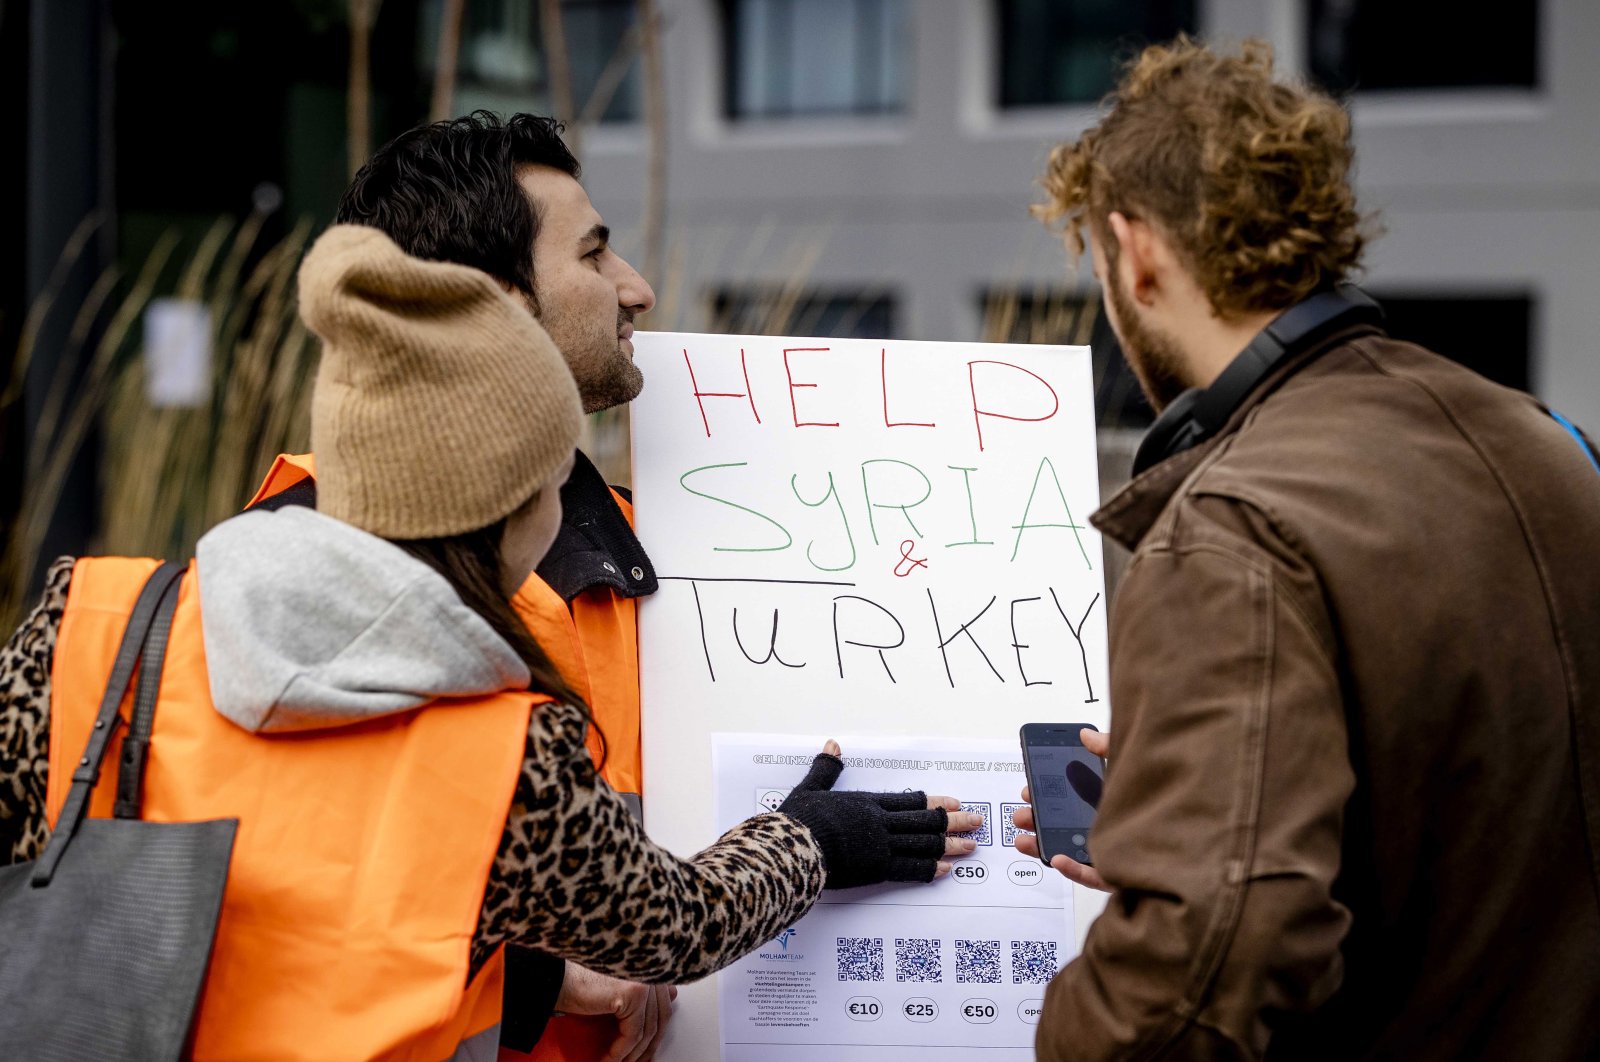 Local volunteers collect money for the victims of the earthquakes in Türkiye and Syria, in Utrecht, the Netherlands, Feb. 11, 2023. (EPA Photo)